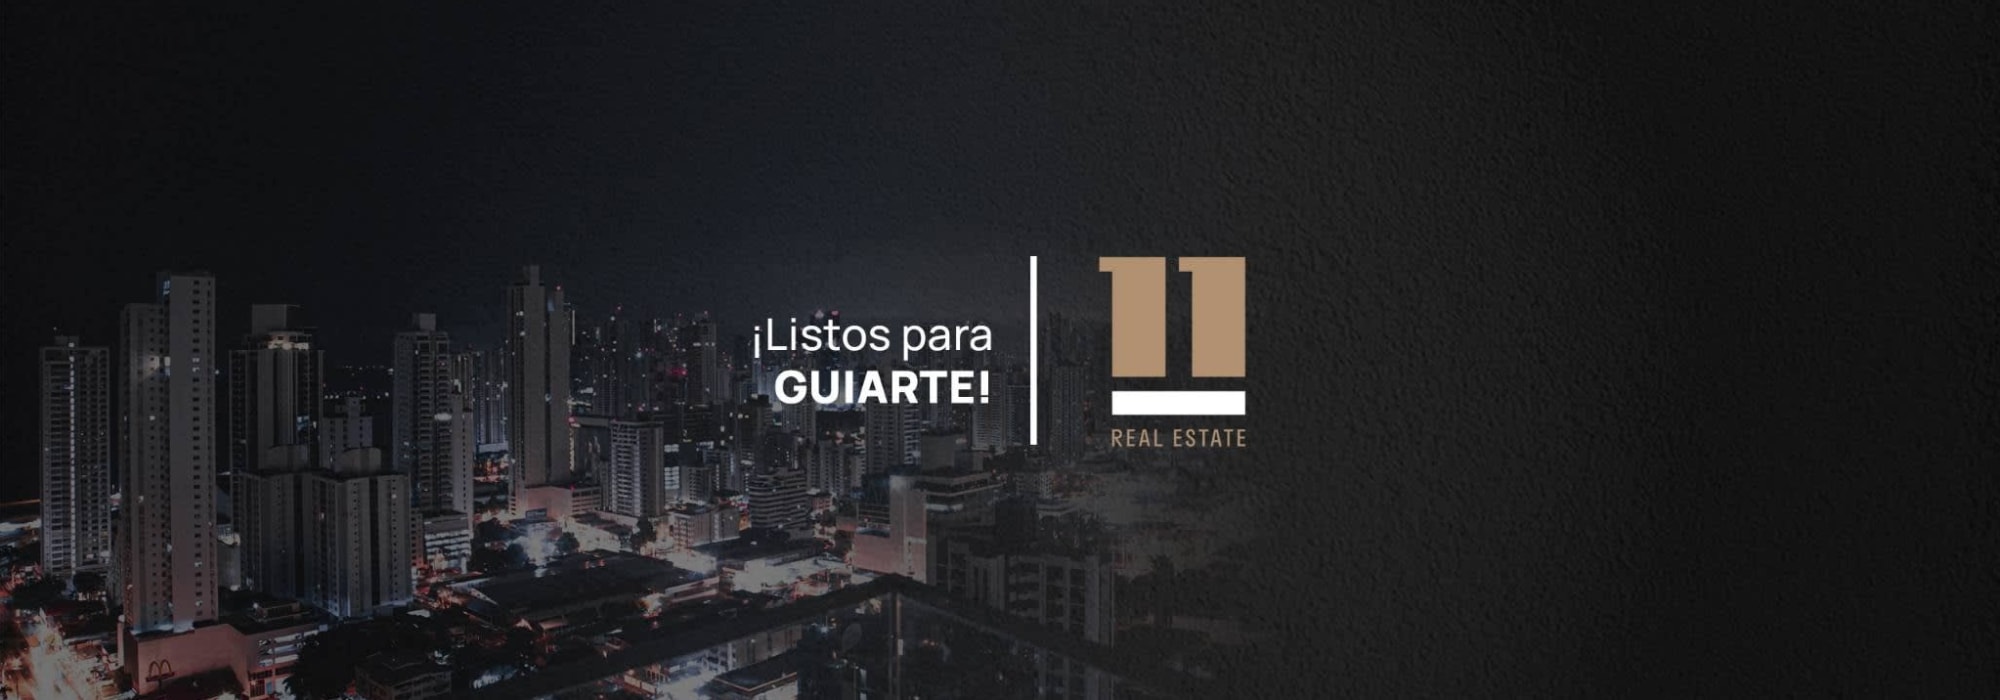 11 Real Estate, S.A.